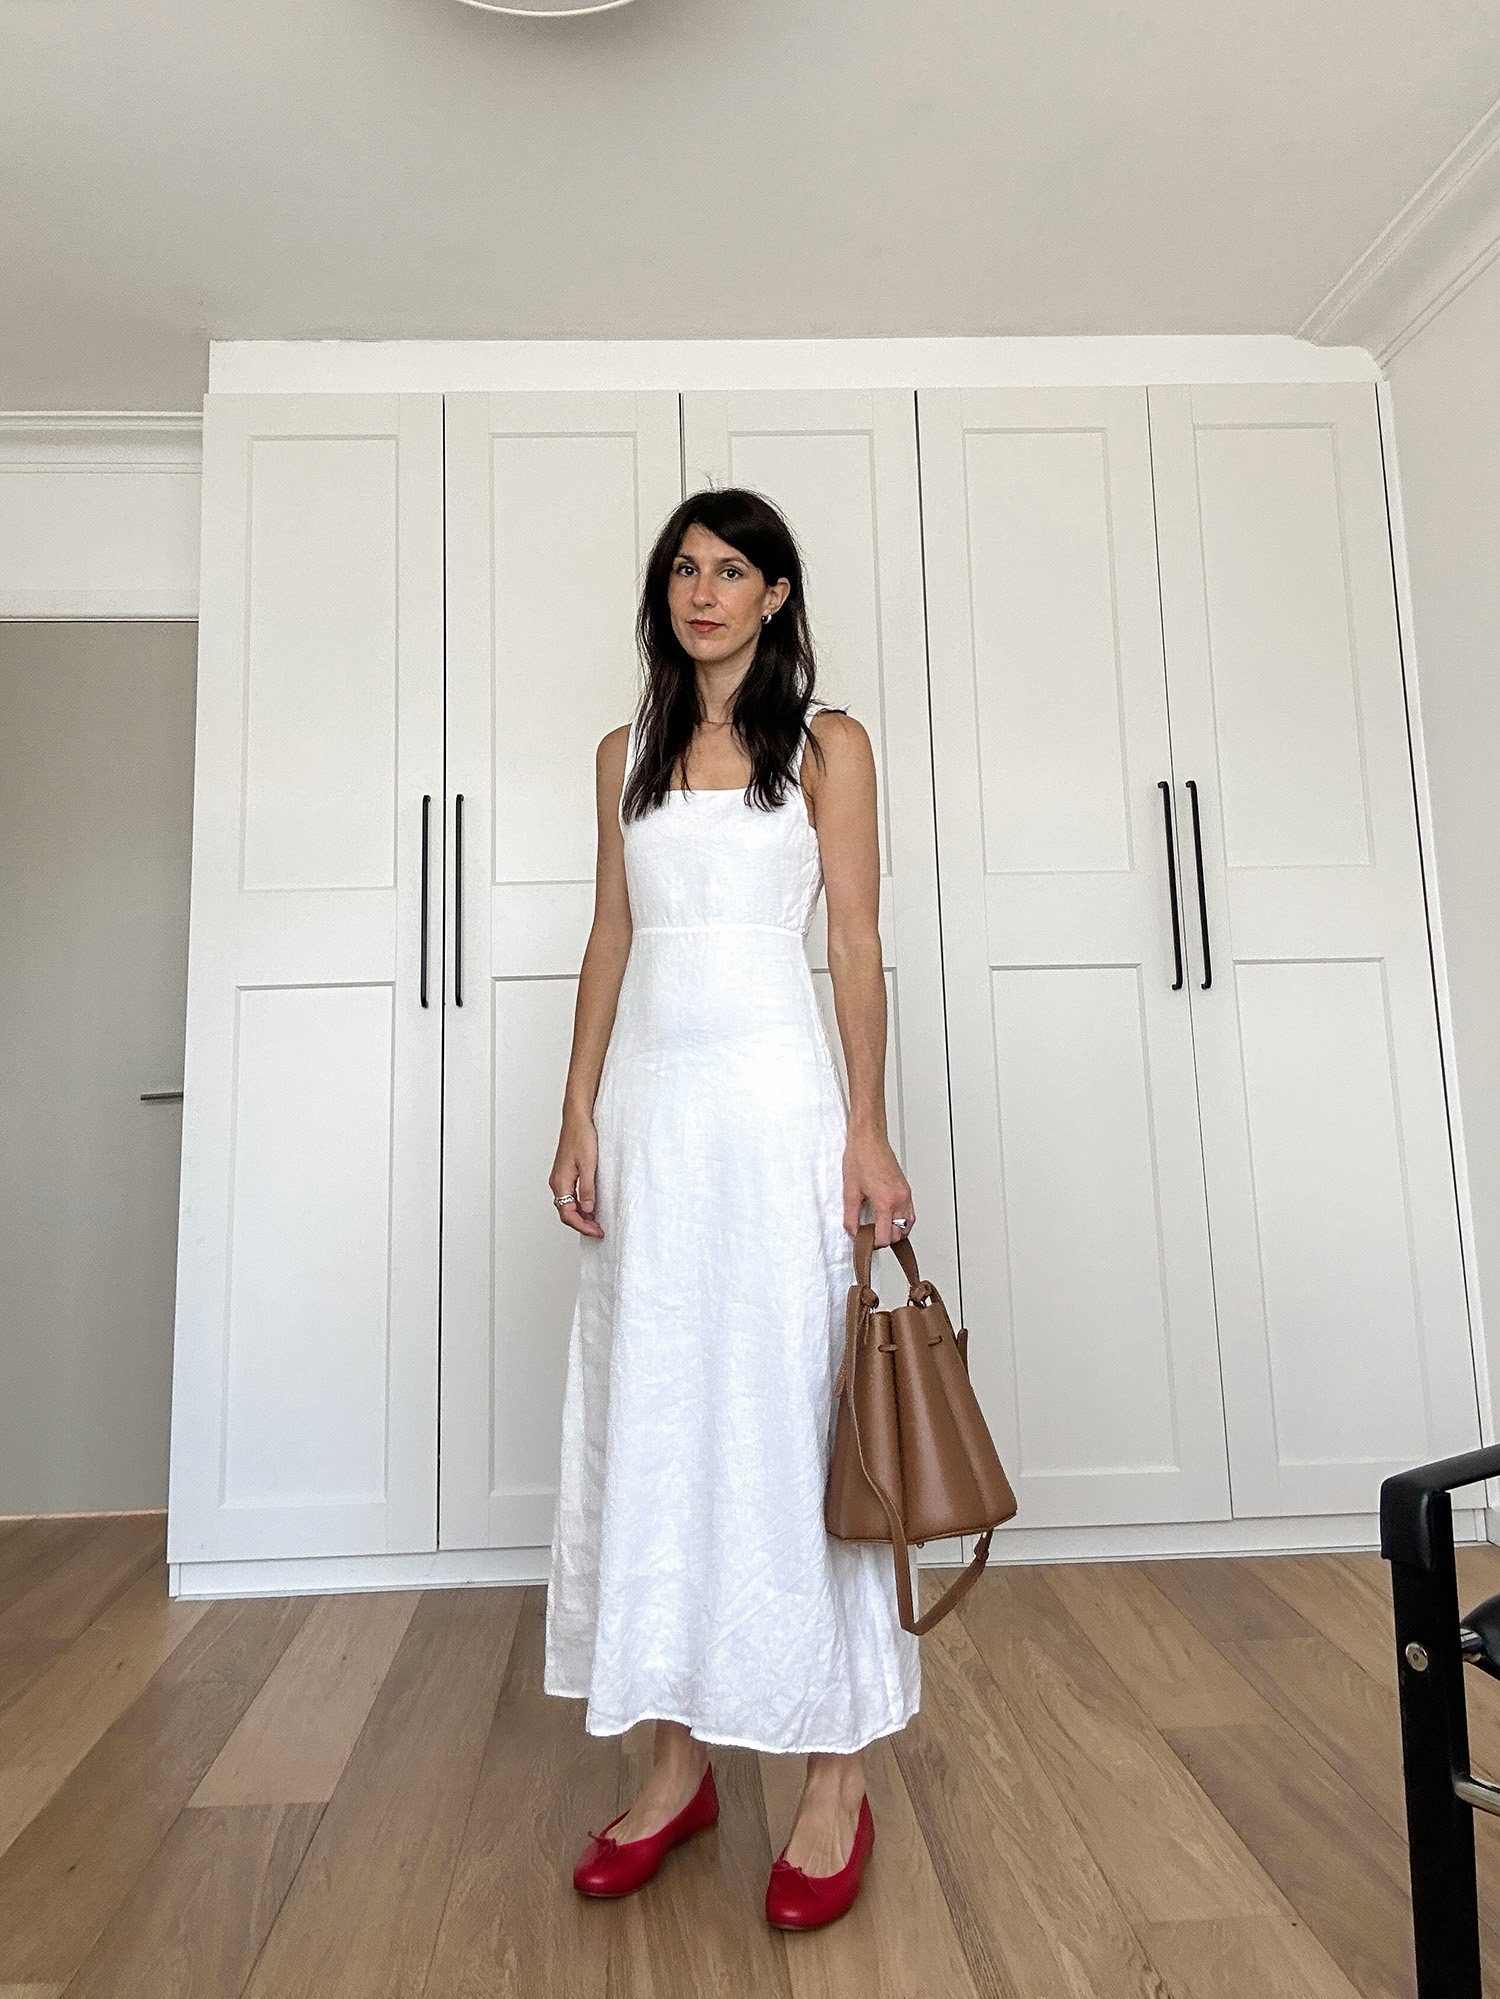 Wearing white dress from DISSH with red ballet flats and Polene bag